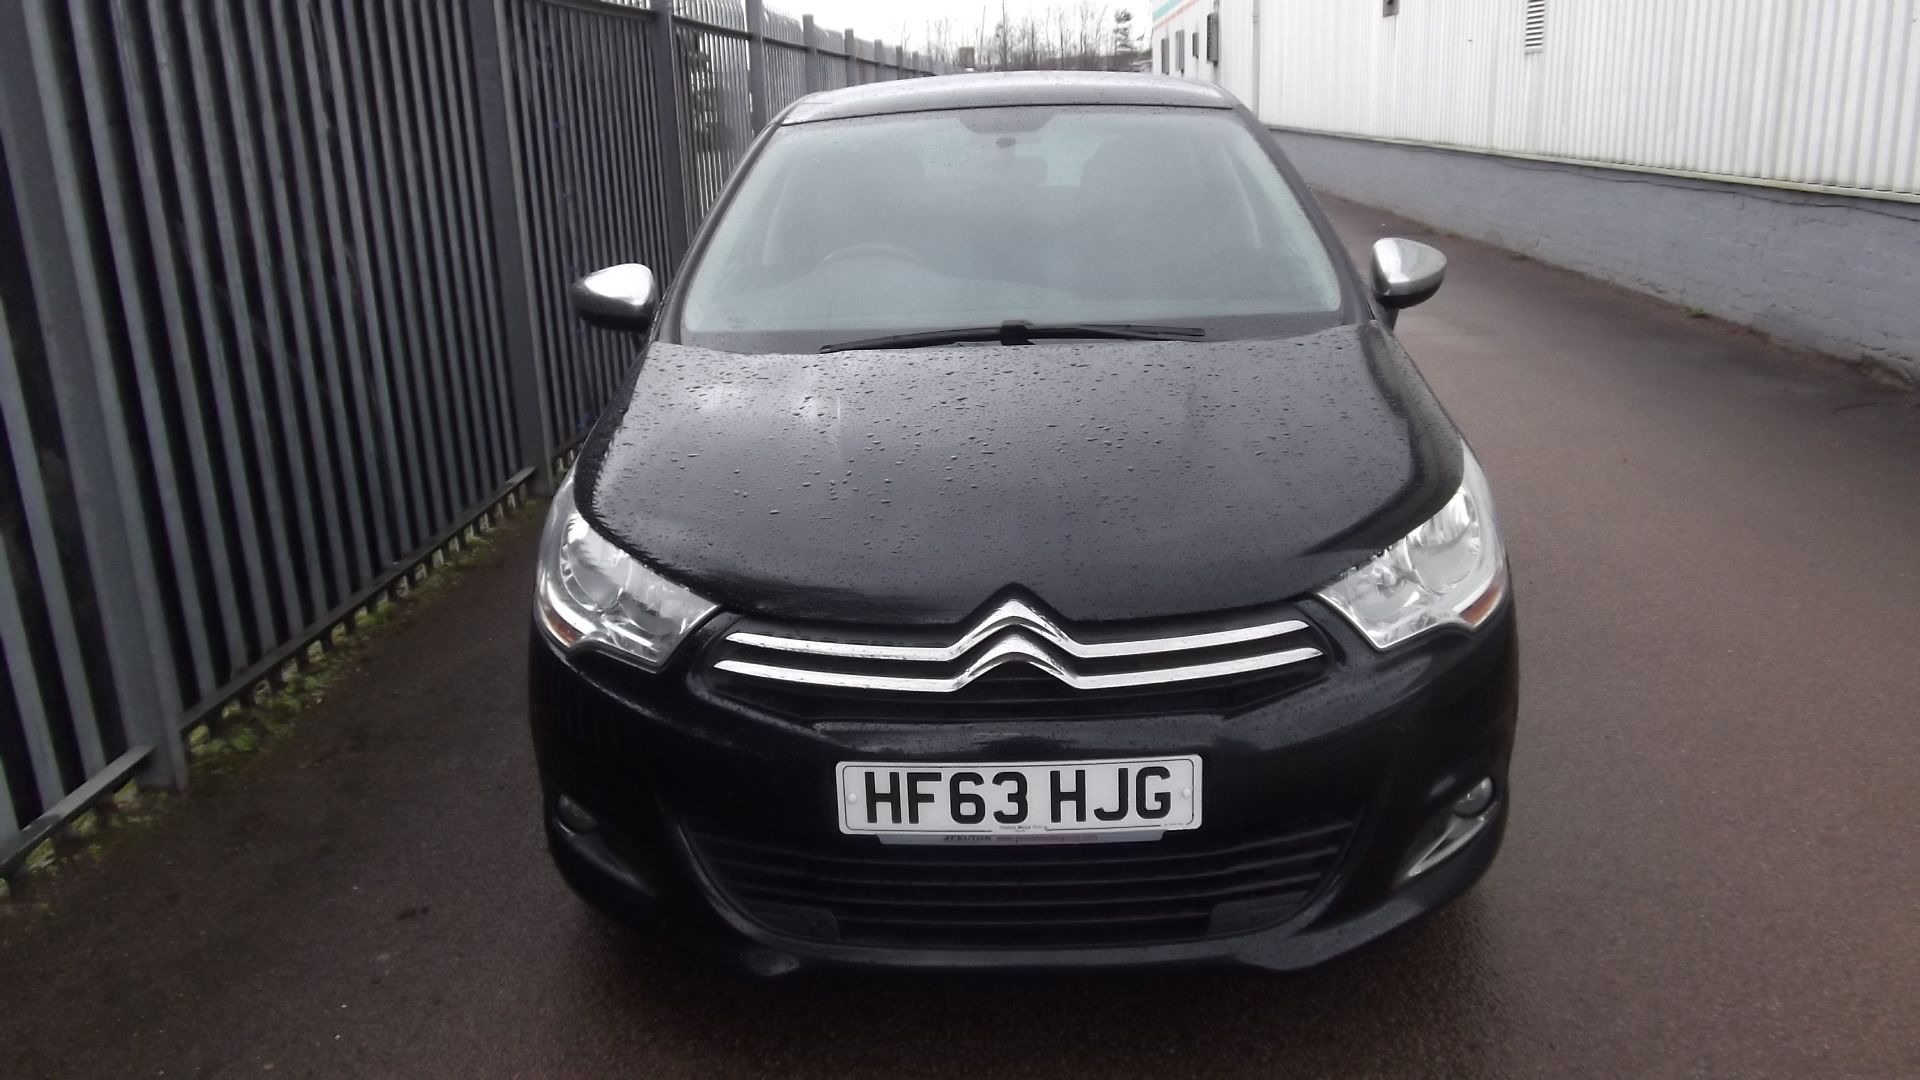 2013 Citroen C4 Selection Airdream E-Hdi 1.6 5Dr Hatchback - CL505 - NO VAT ON THE HAMM - Image 12 of 22